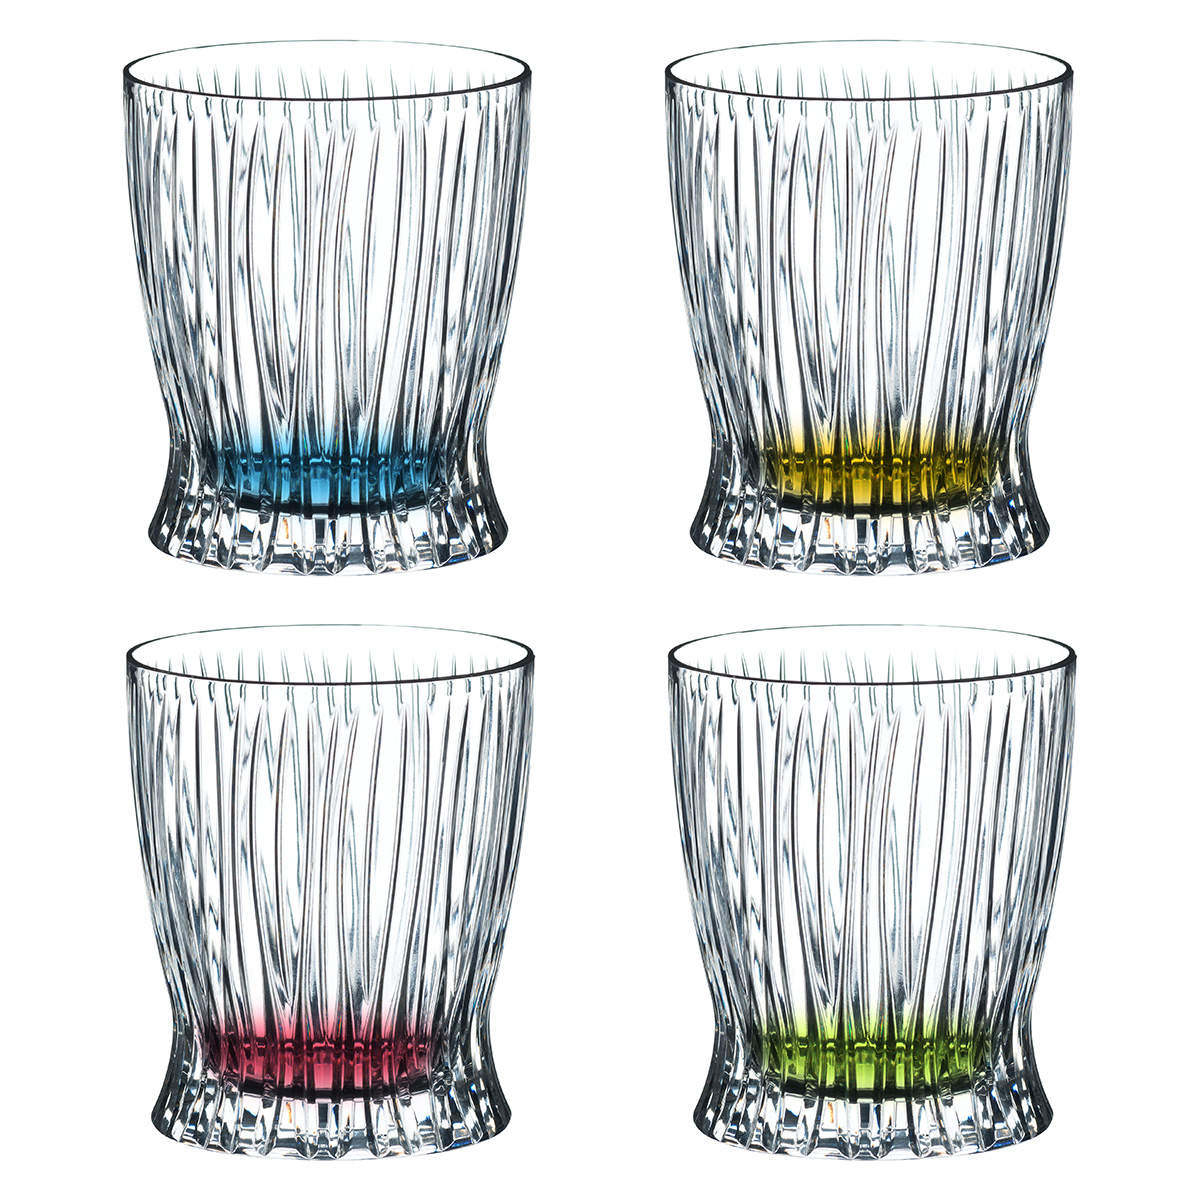 Whisky Tumbler Set Fire & Ice | Tumbler Collection - Riedel | 300 ml (4 Stk)